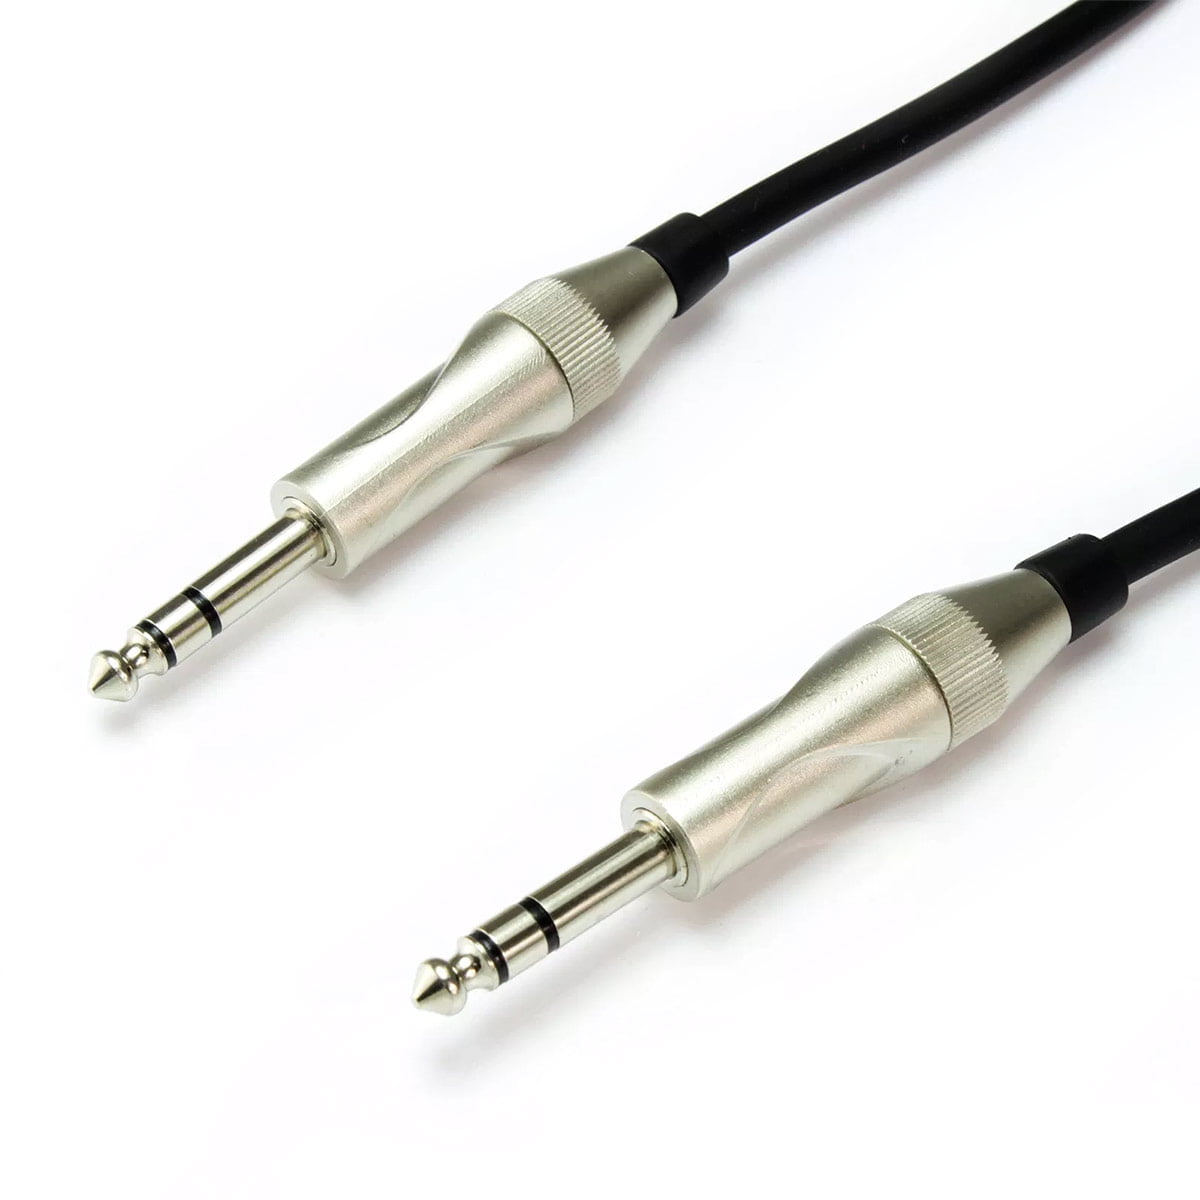 https://www.dmmusic.com/backend/wp-content/uploads/jack-jack-stereo-cable.jpg